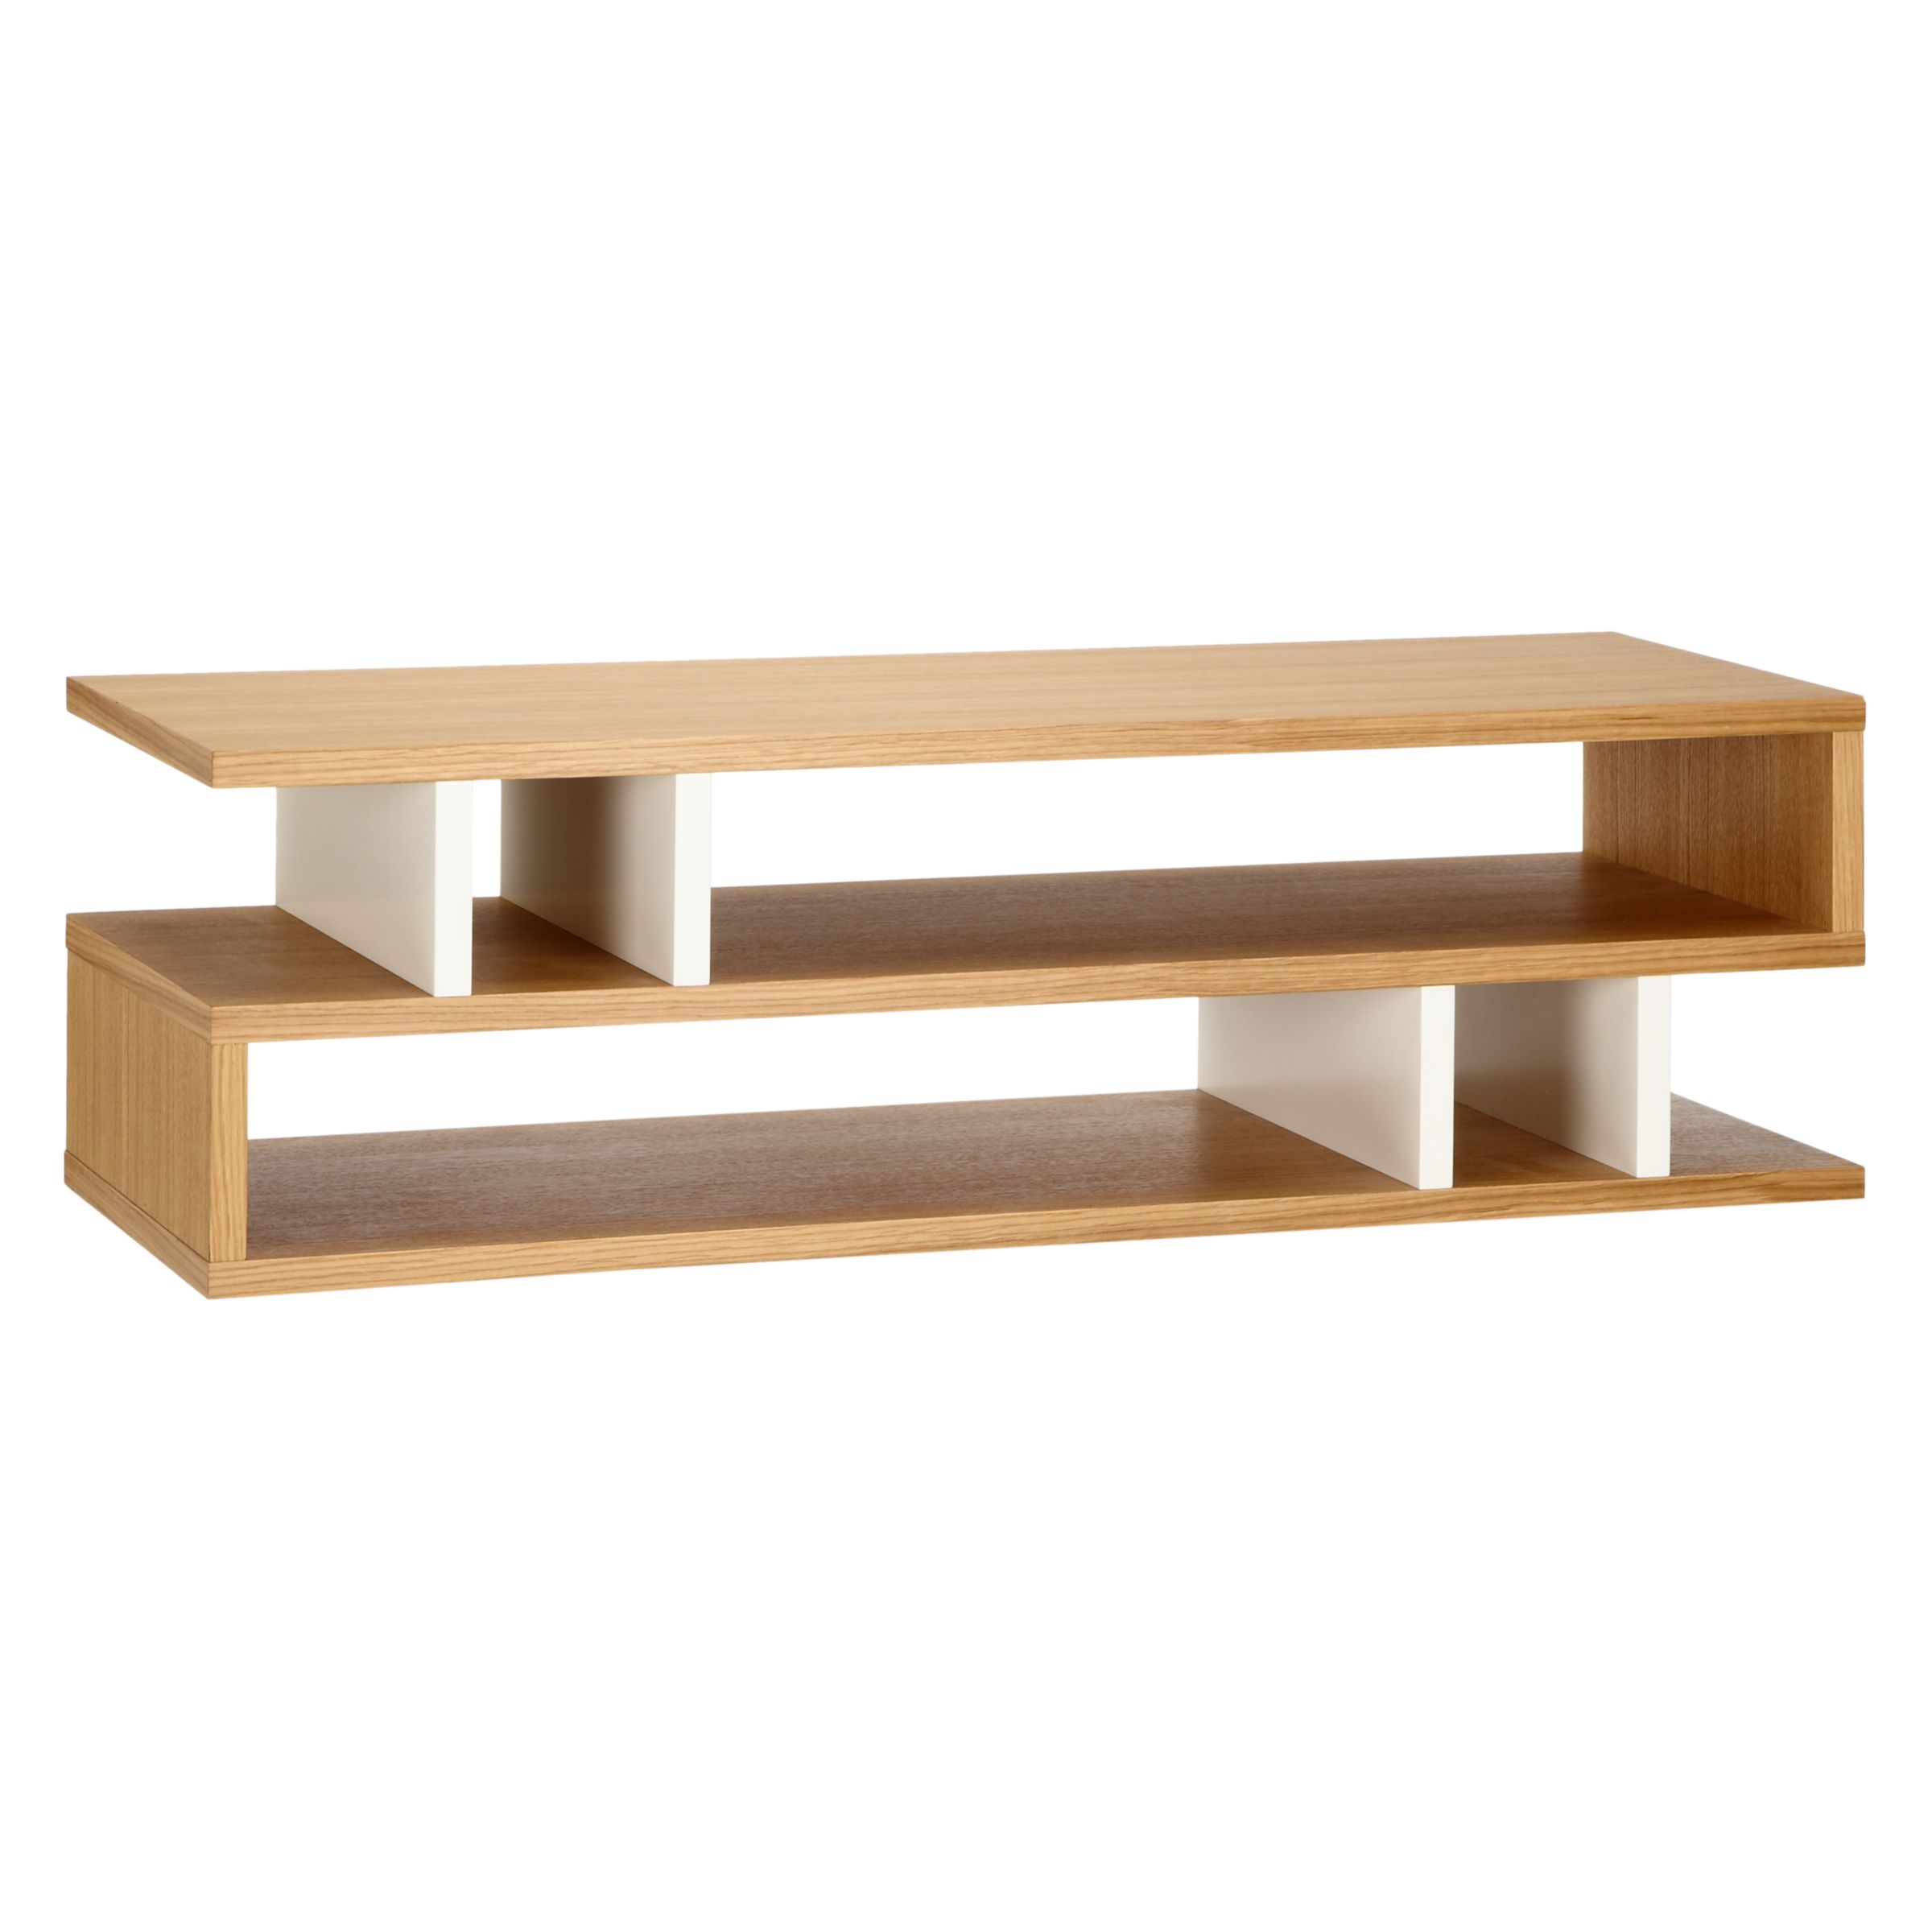 Content by Terence Conran Counterbalance Coffee Table